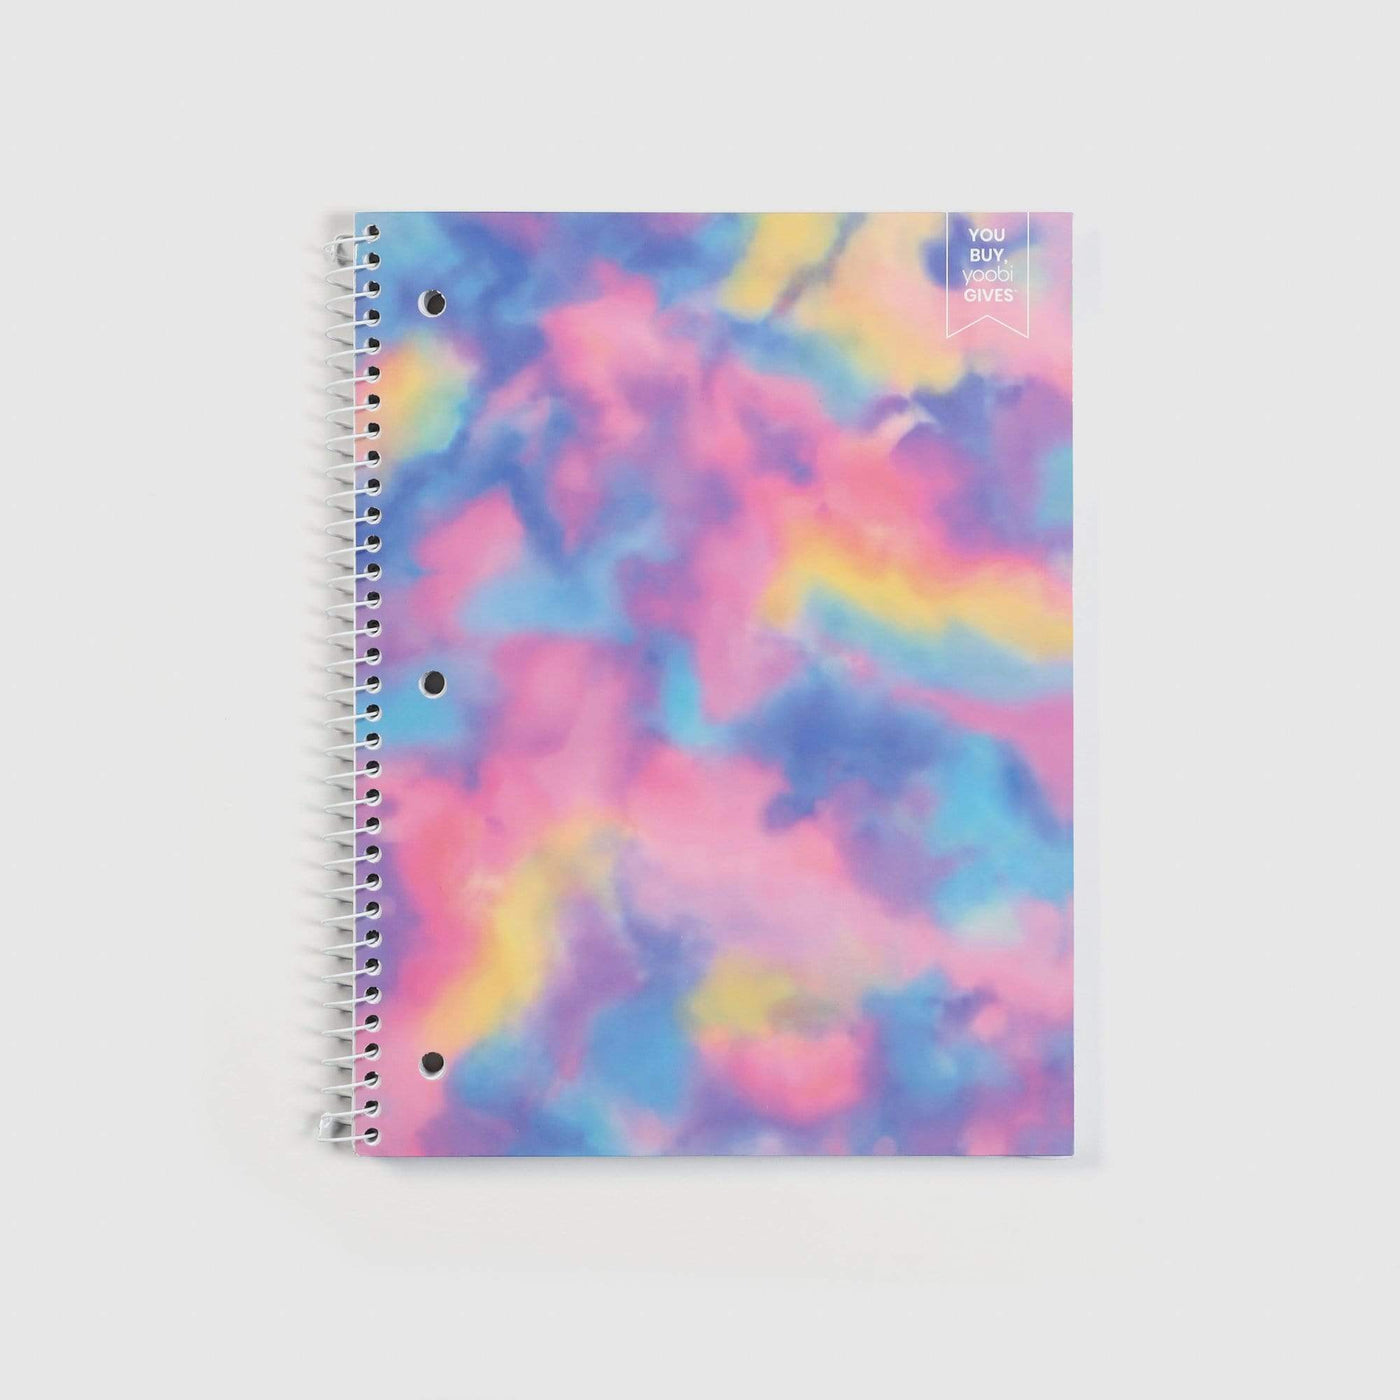 one subject spiral notebook with tie-dye print